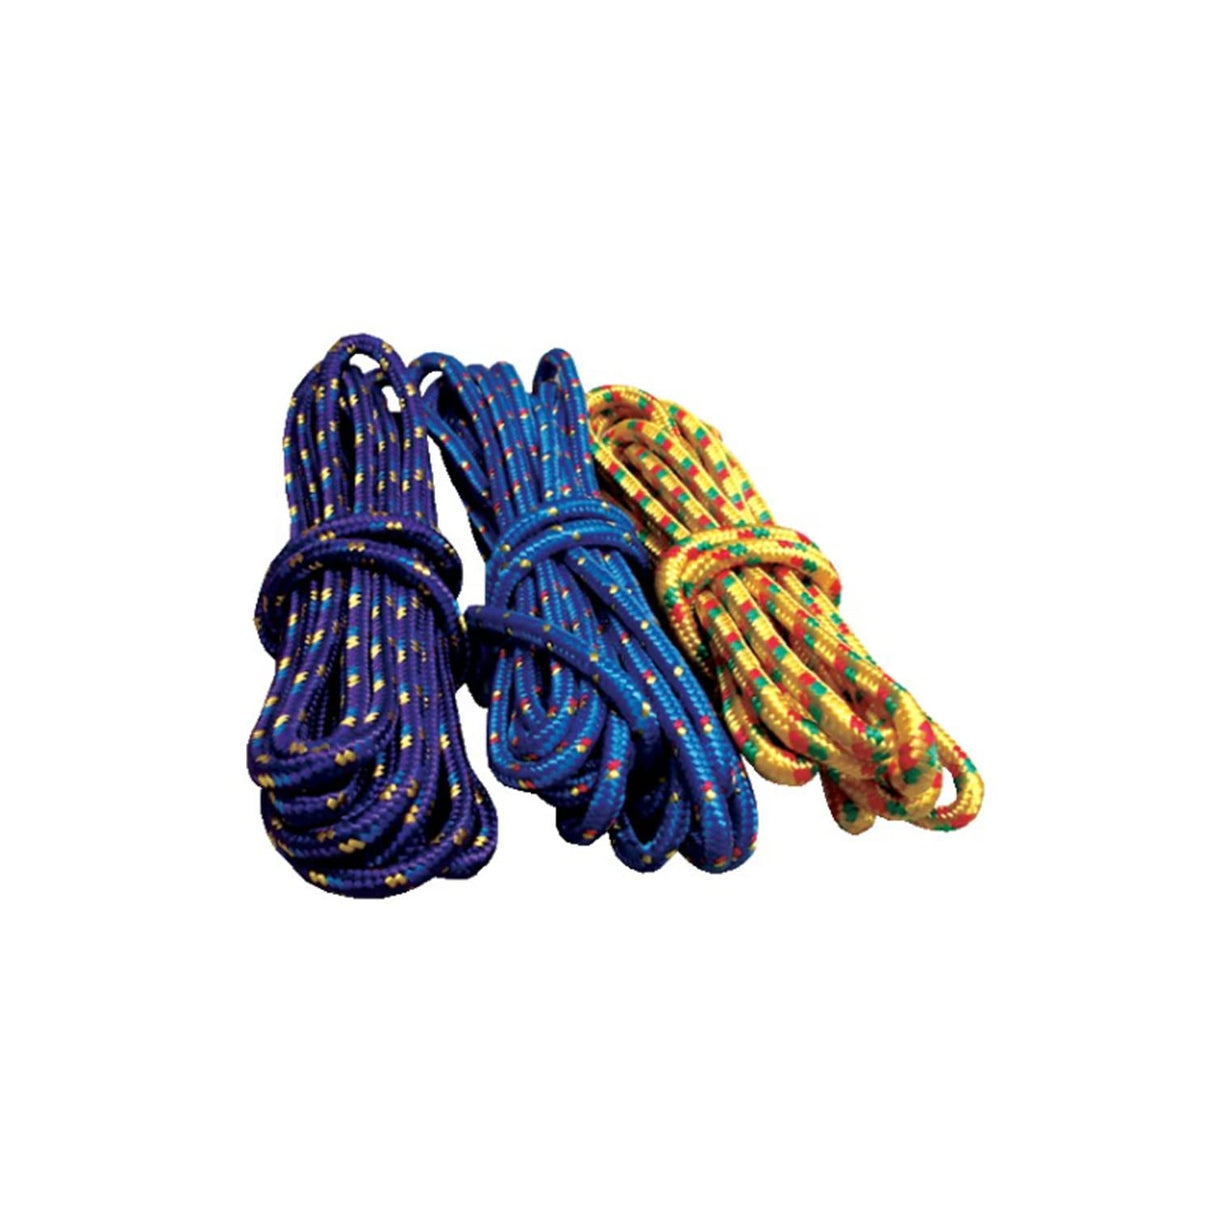 Attwood 11704-2 Braided Polypropylene Utility Line, 3/8-Inch Thick, 25 Feet Long, Multi-Color